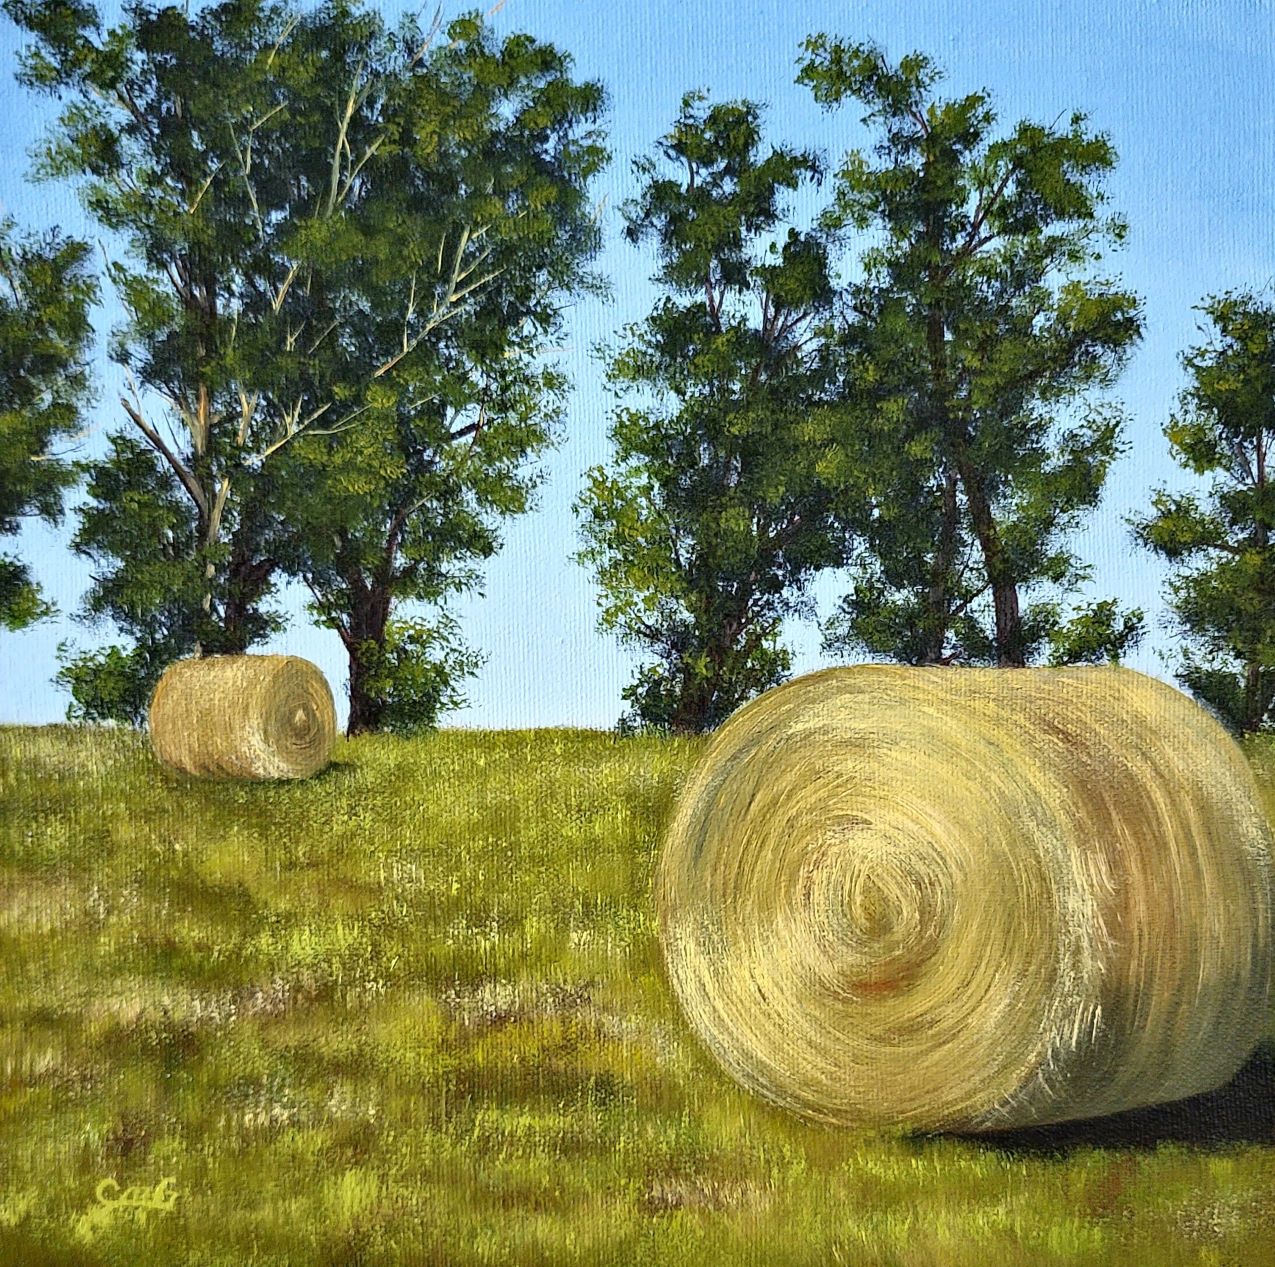 Oil on canvas landscape painting of hay bales in front of some old willow trees